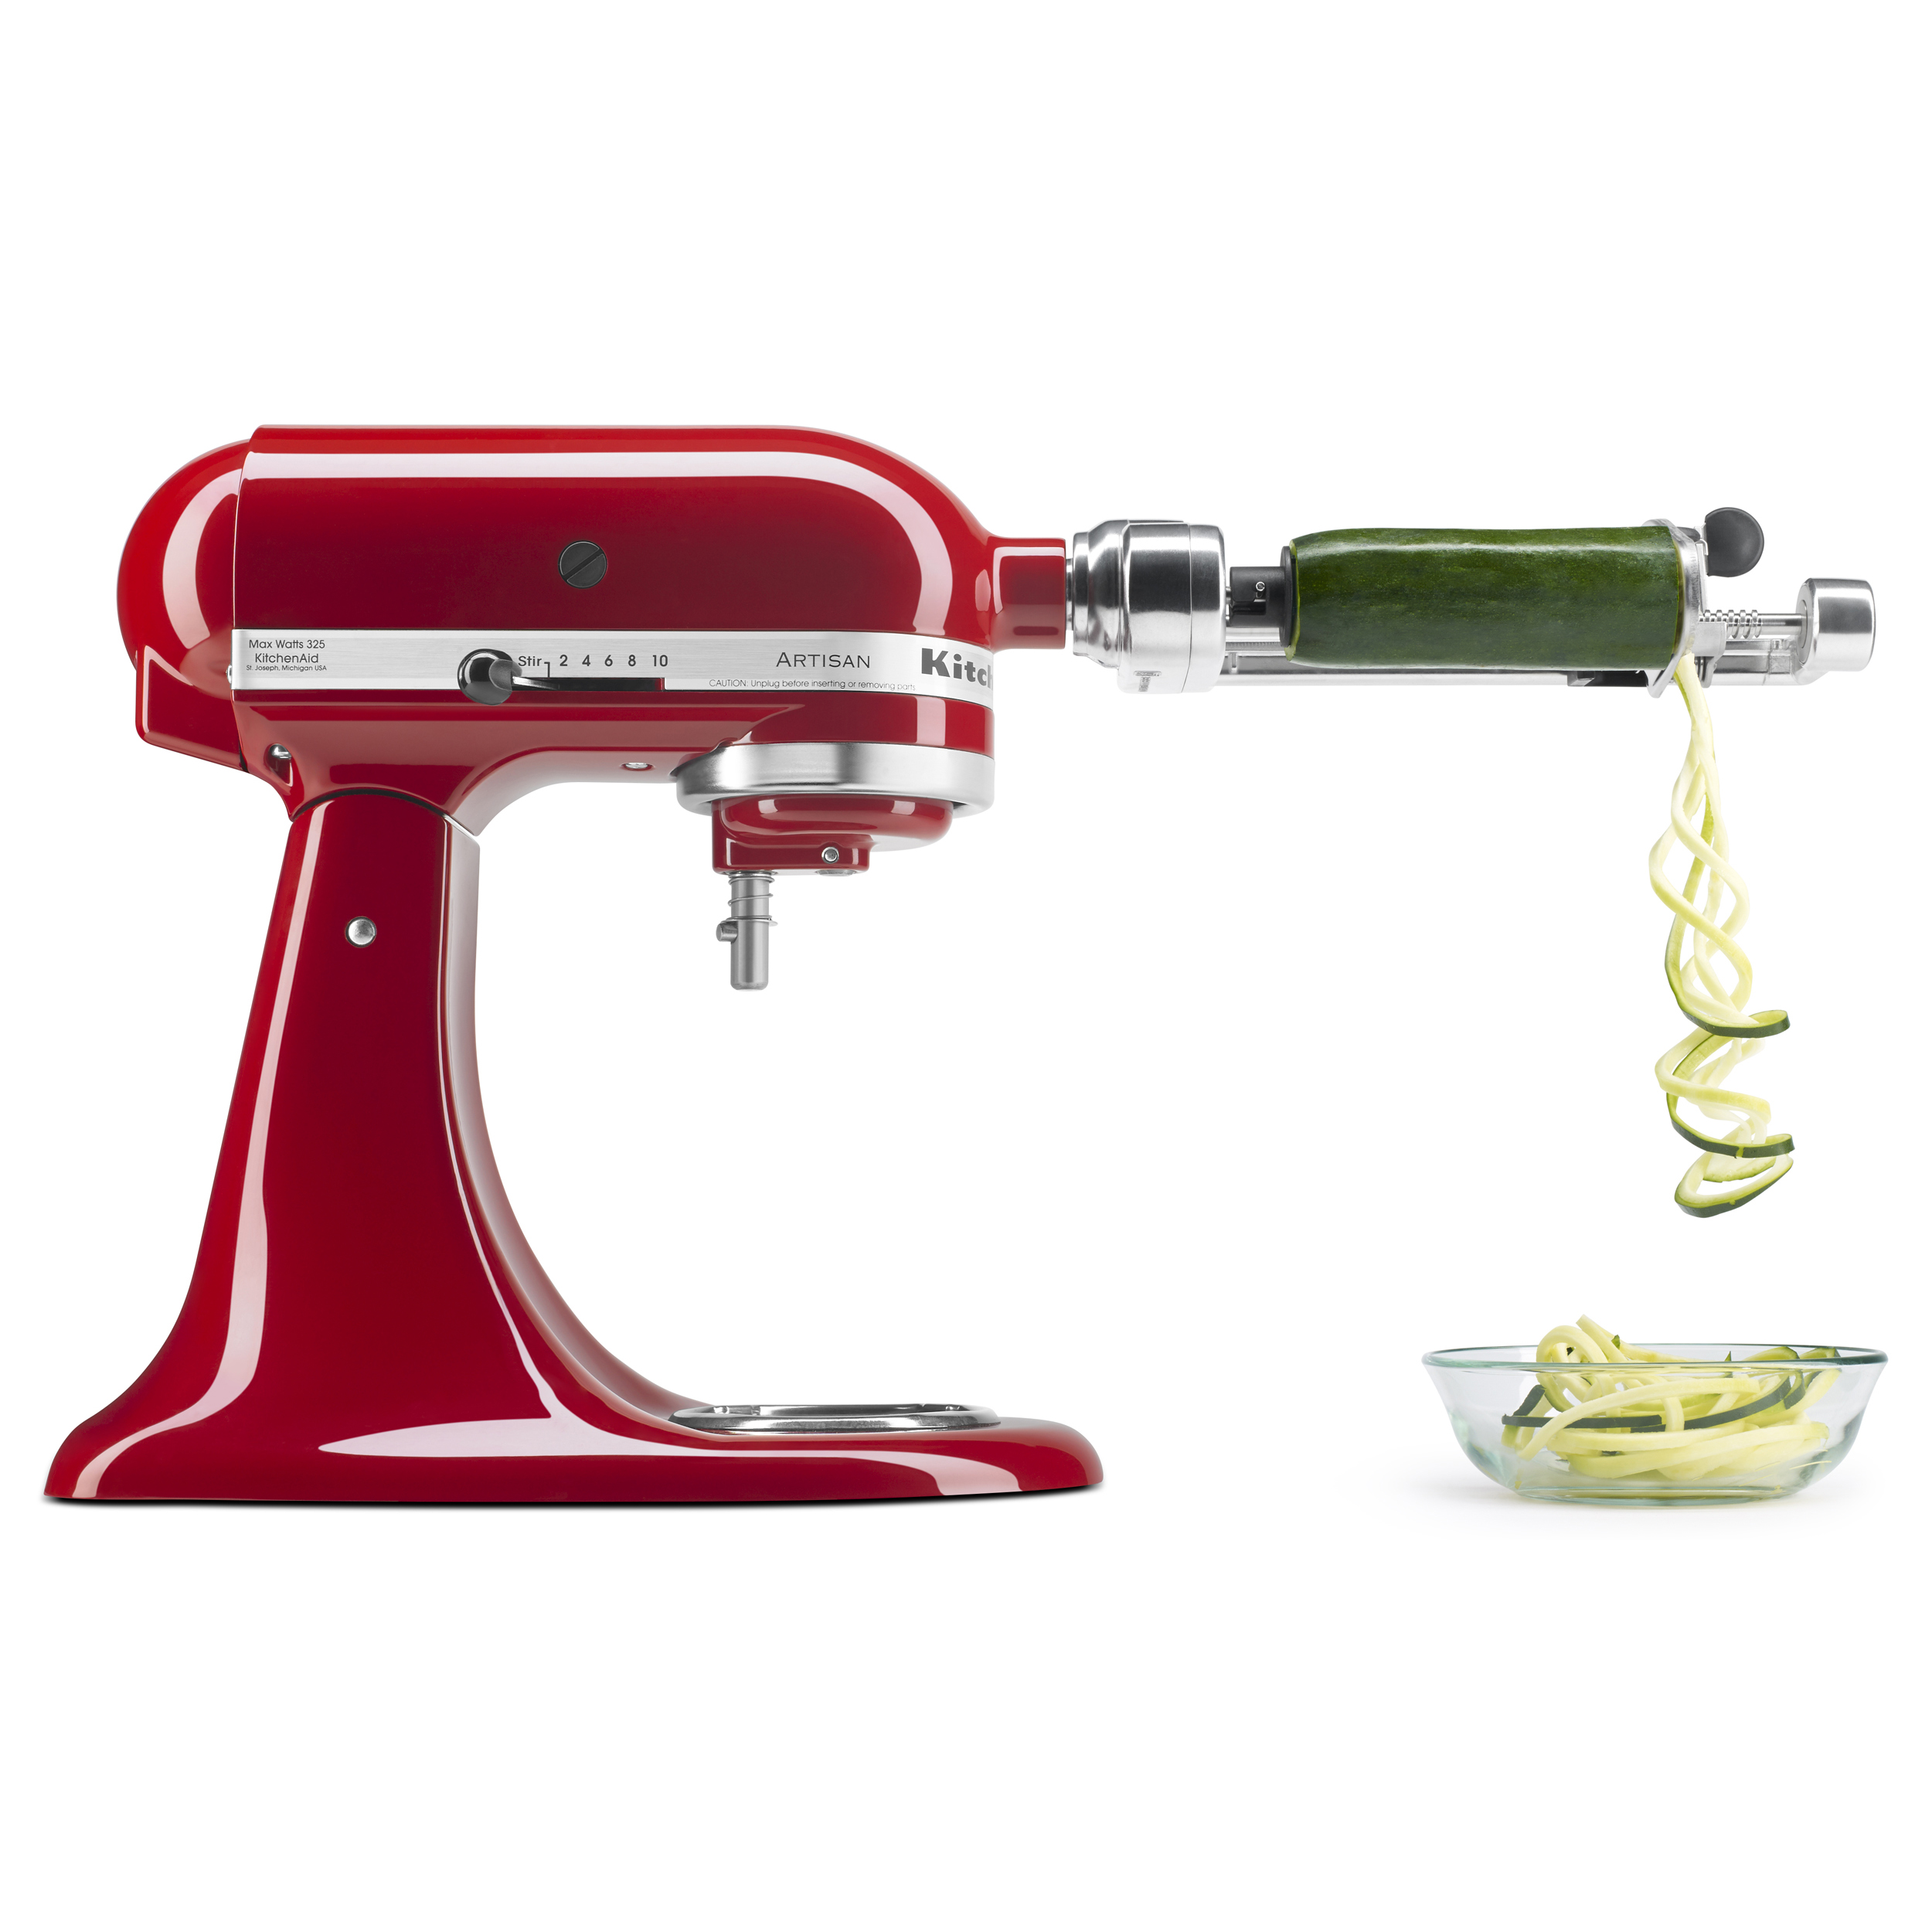 The Best KitchenAid Mixer Cyber Monday Deals from Only $17